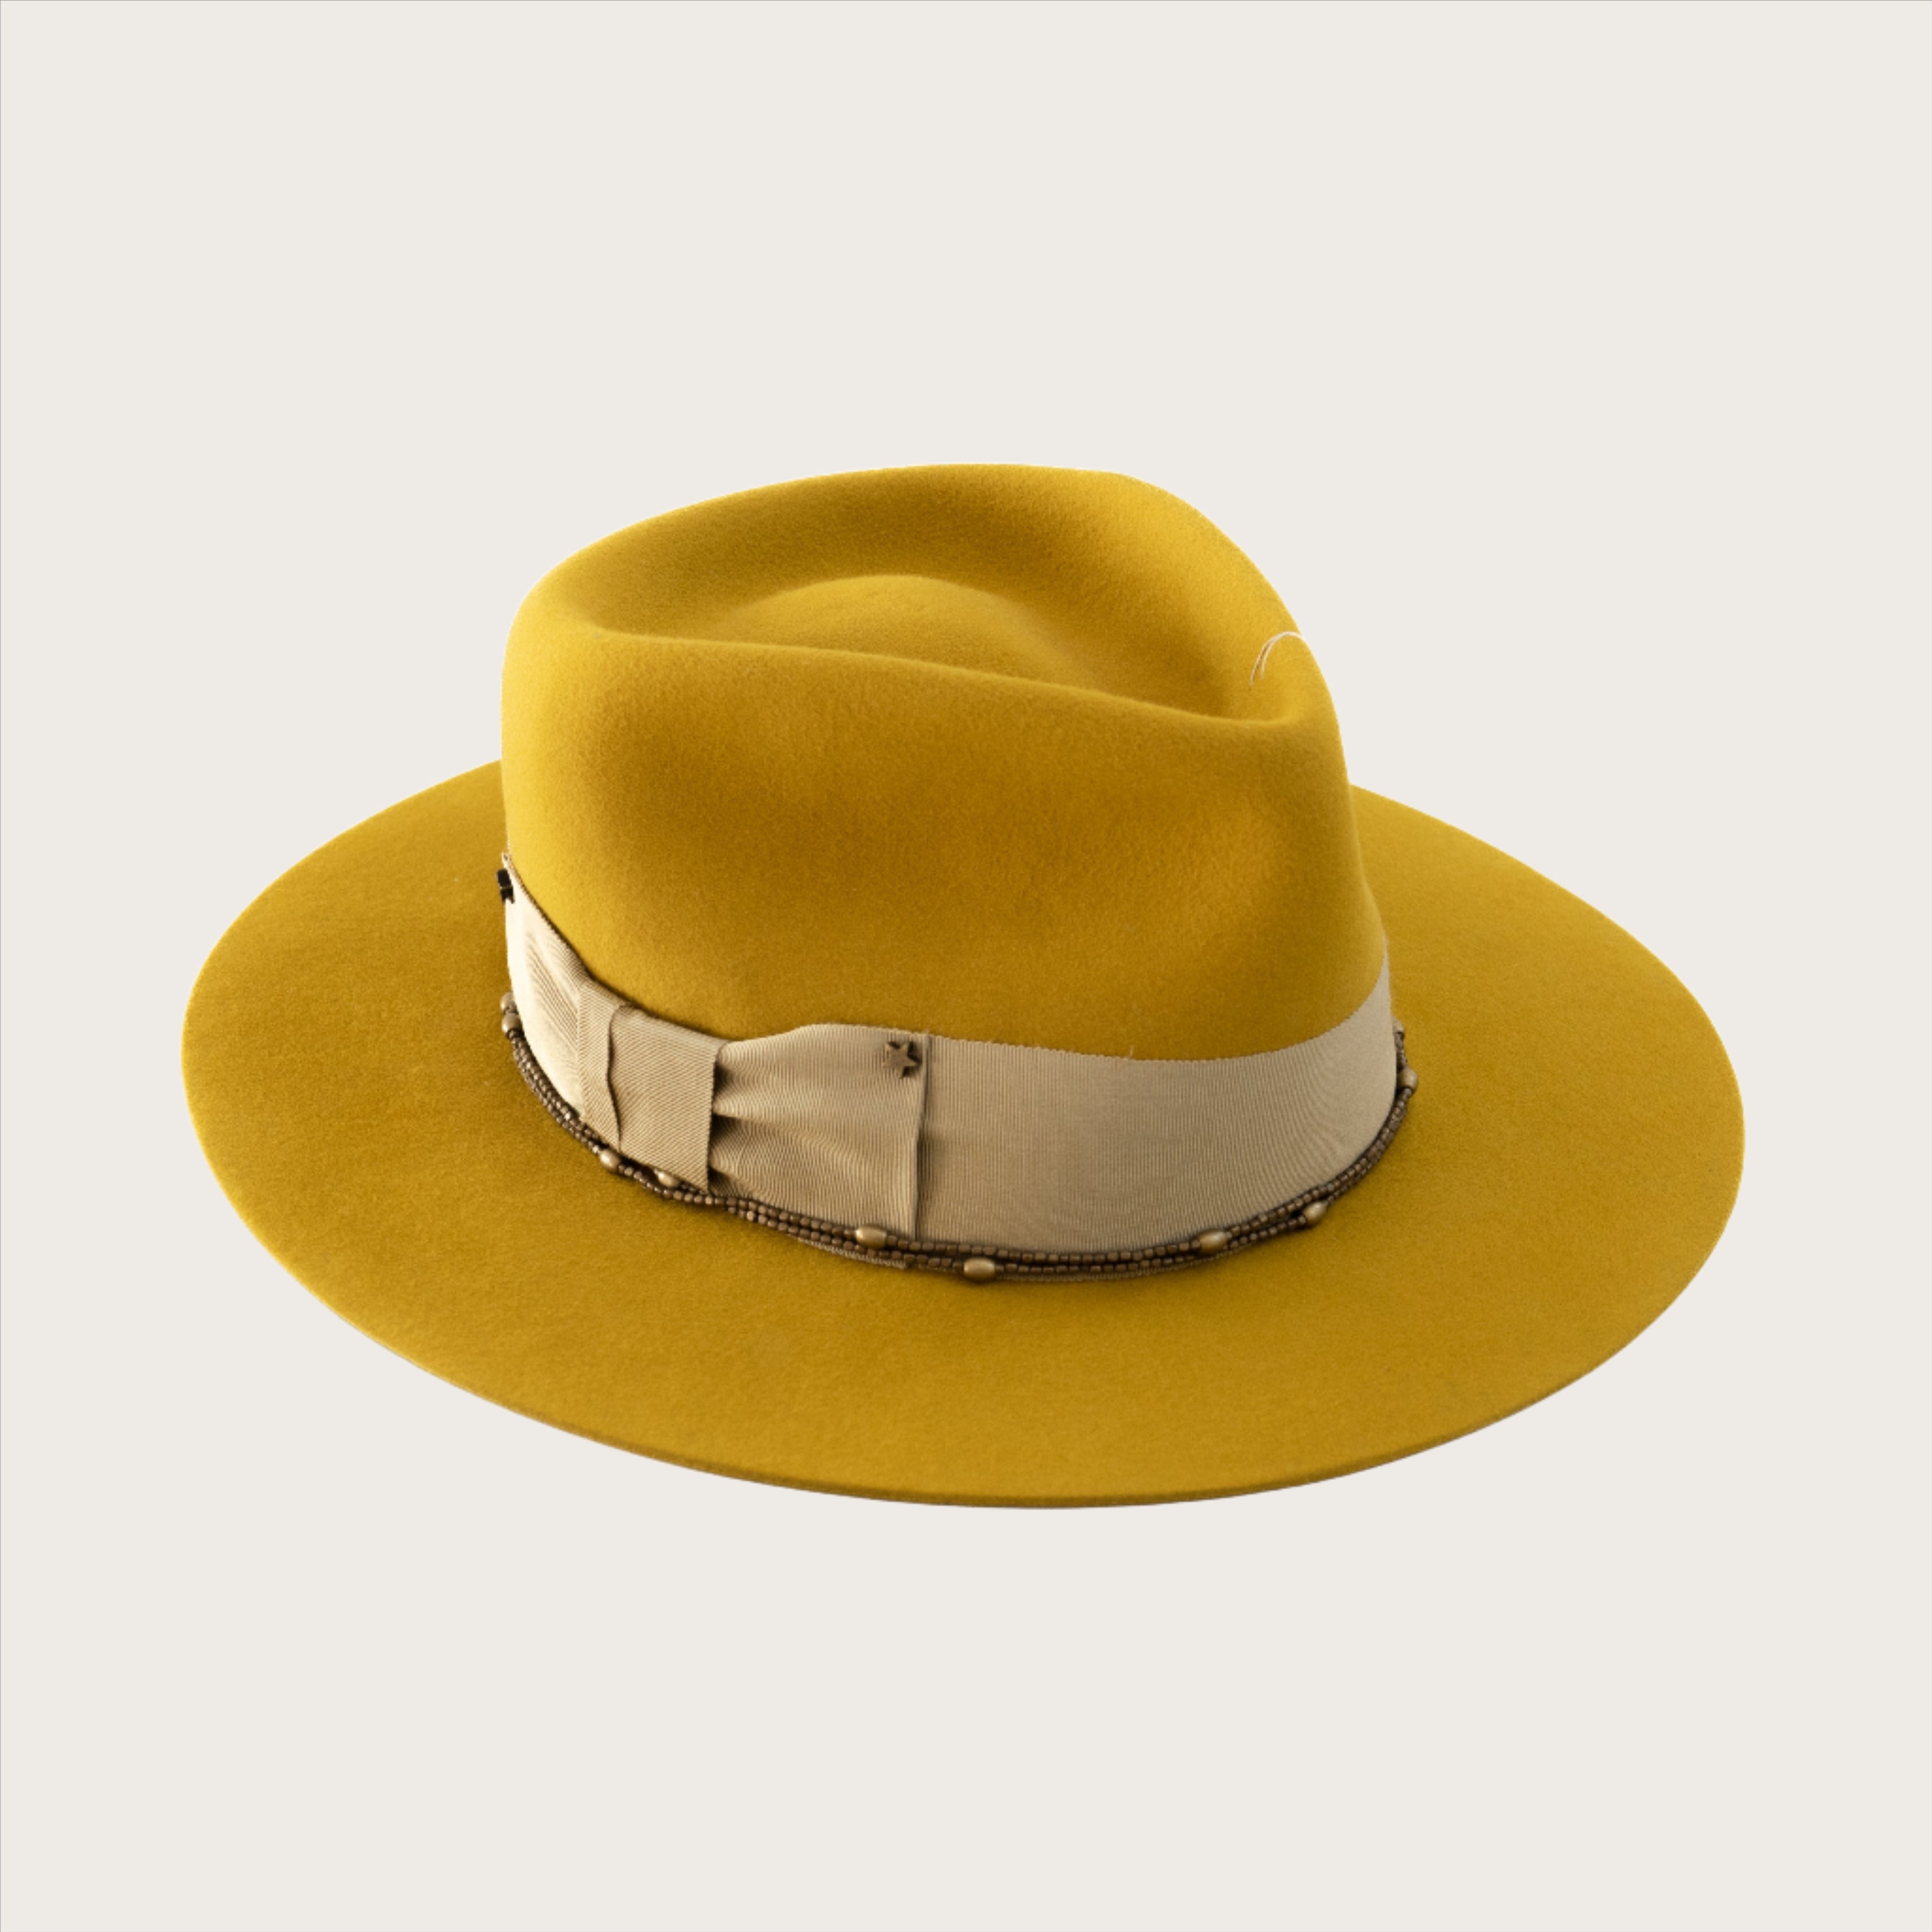 Ludovic Baussan - Hatmaker - Made to Measure Collection